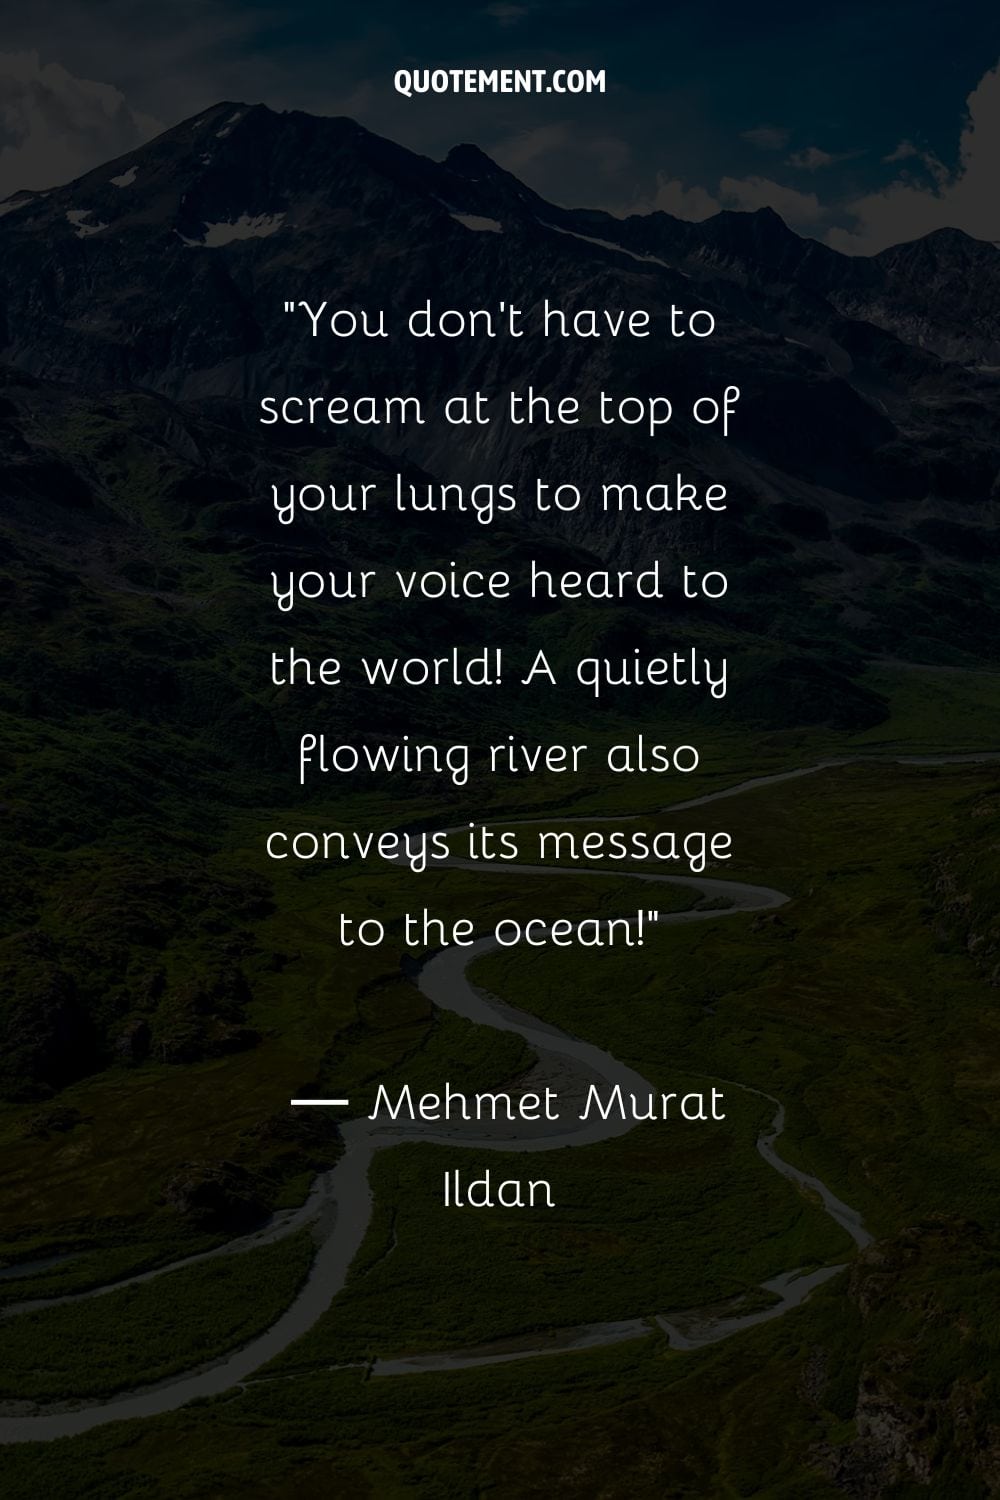 Spectacular river valley nestled in mountains representing deep river quote